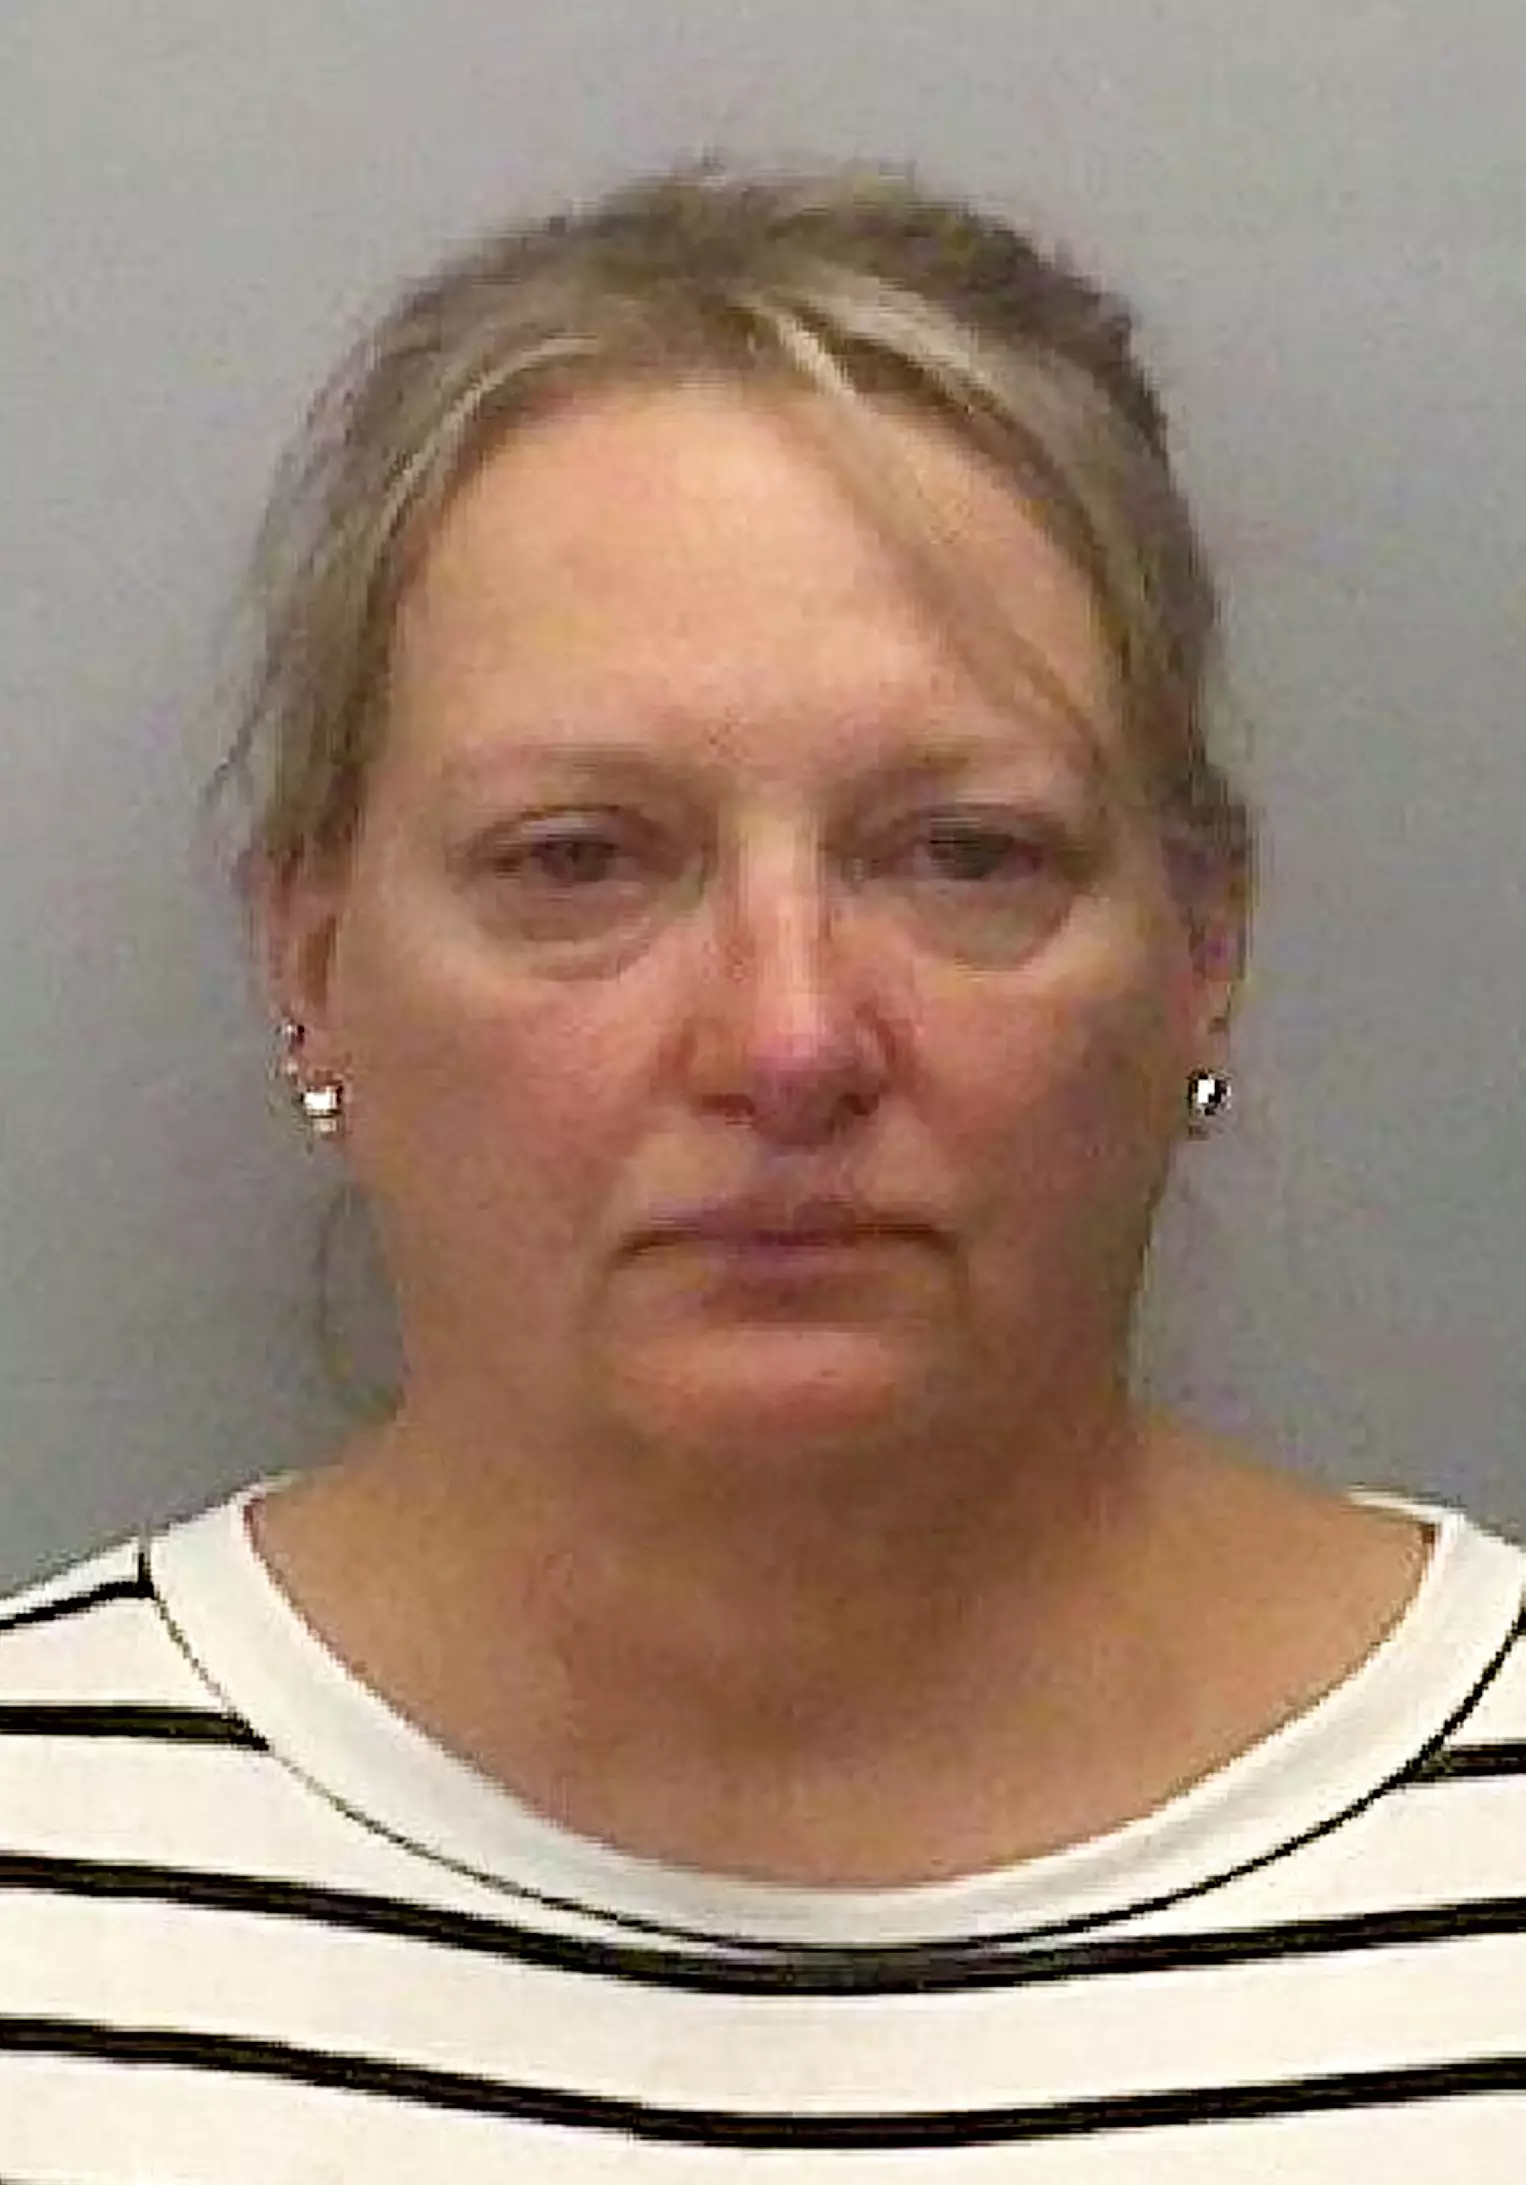 Jennifer A. Janus Yeager was arrested on suspicion of endangering the health or life of a child and reckless conduct.